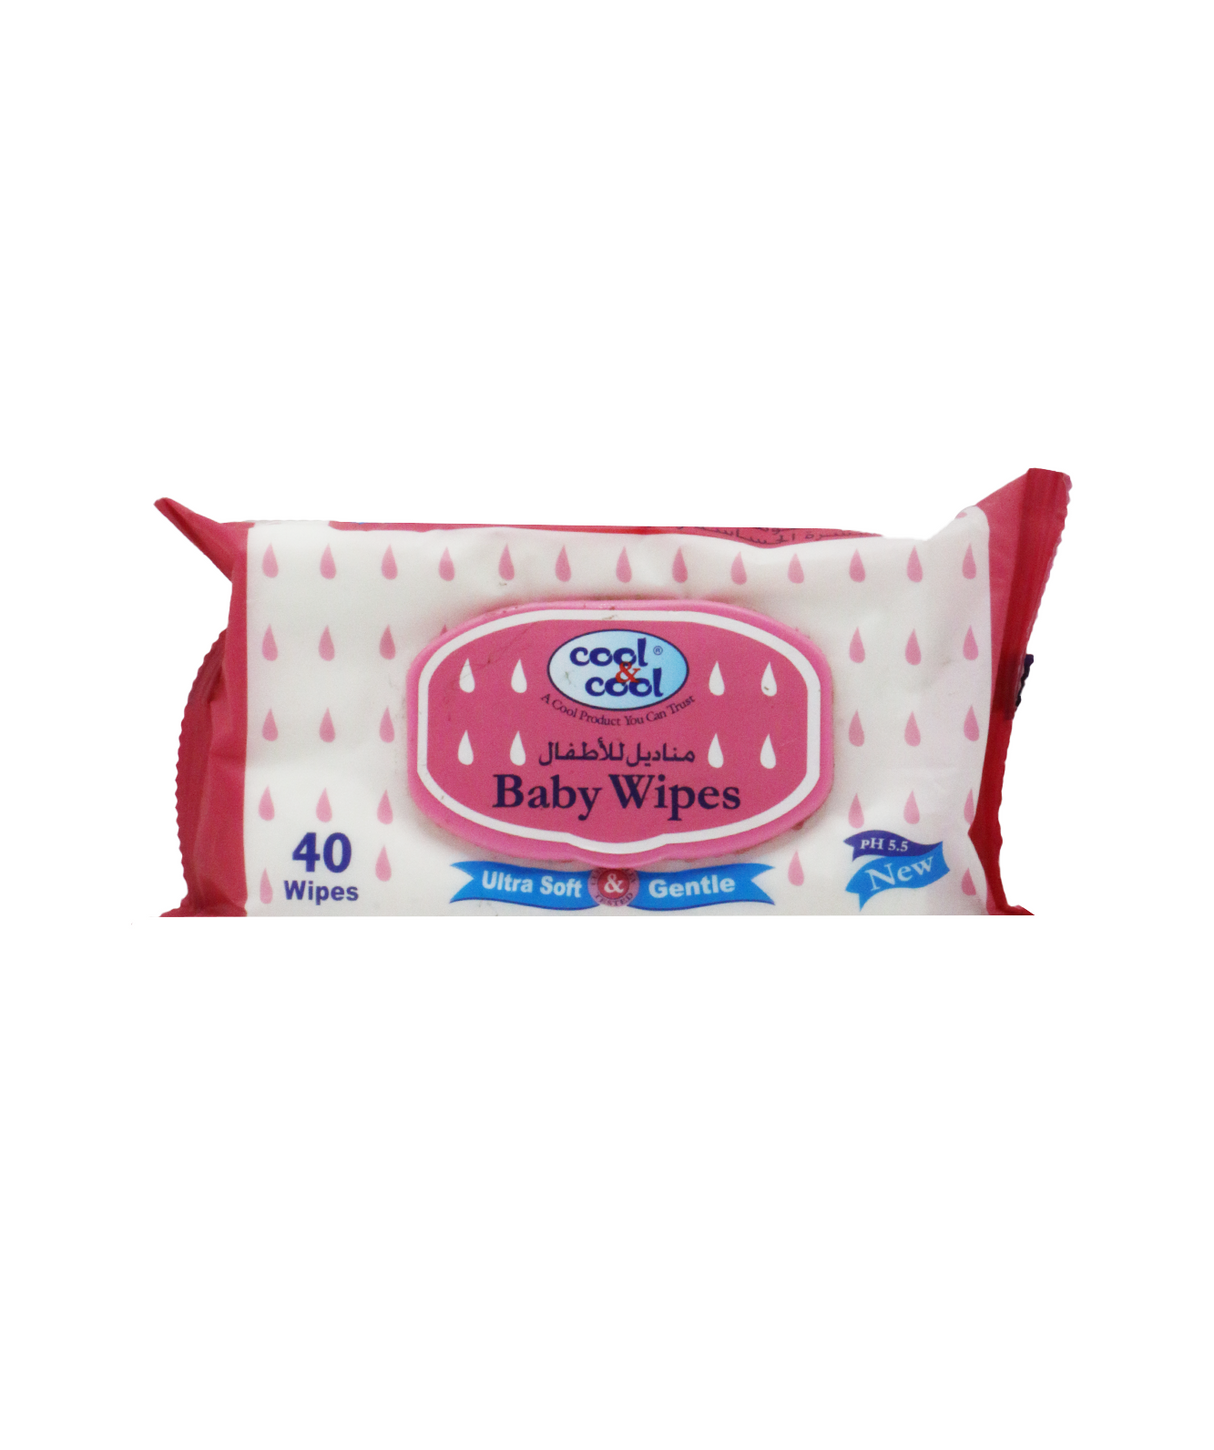 cool&cool baby wipes 40pc b-2382c